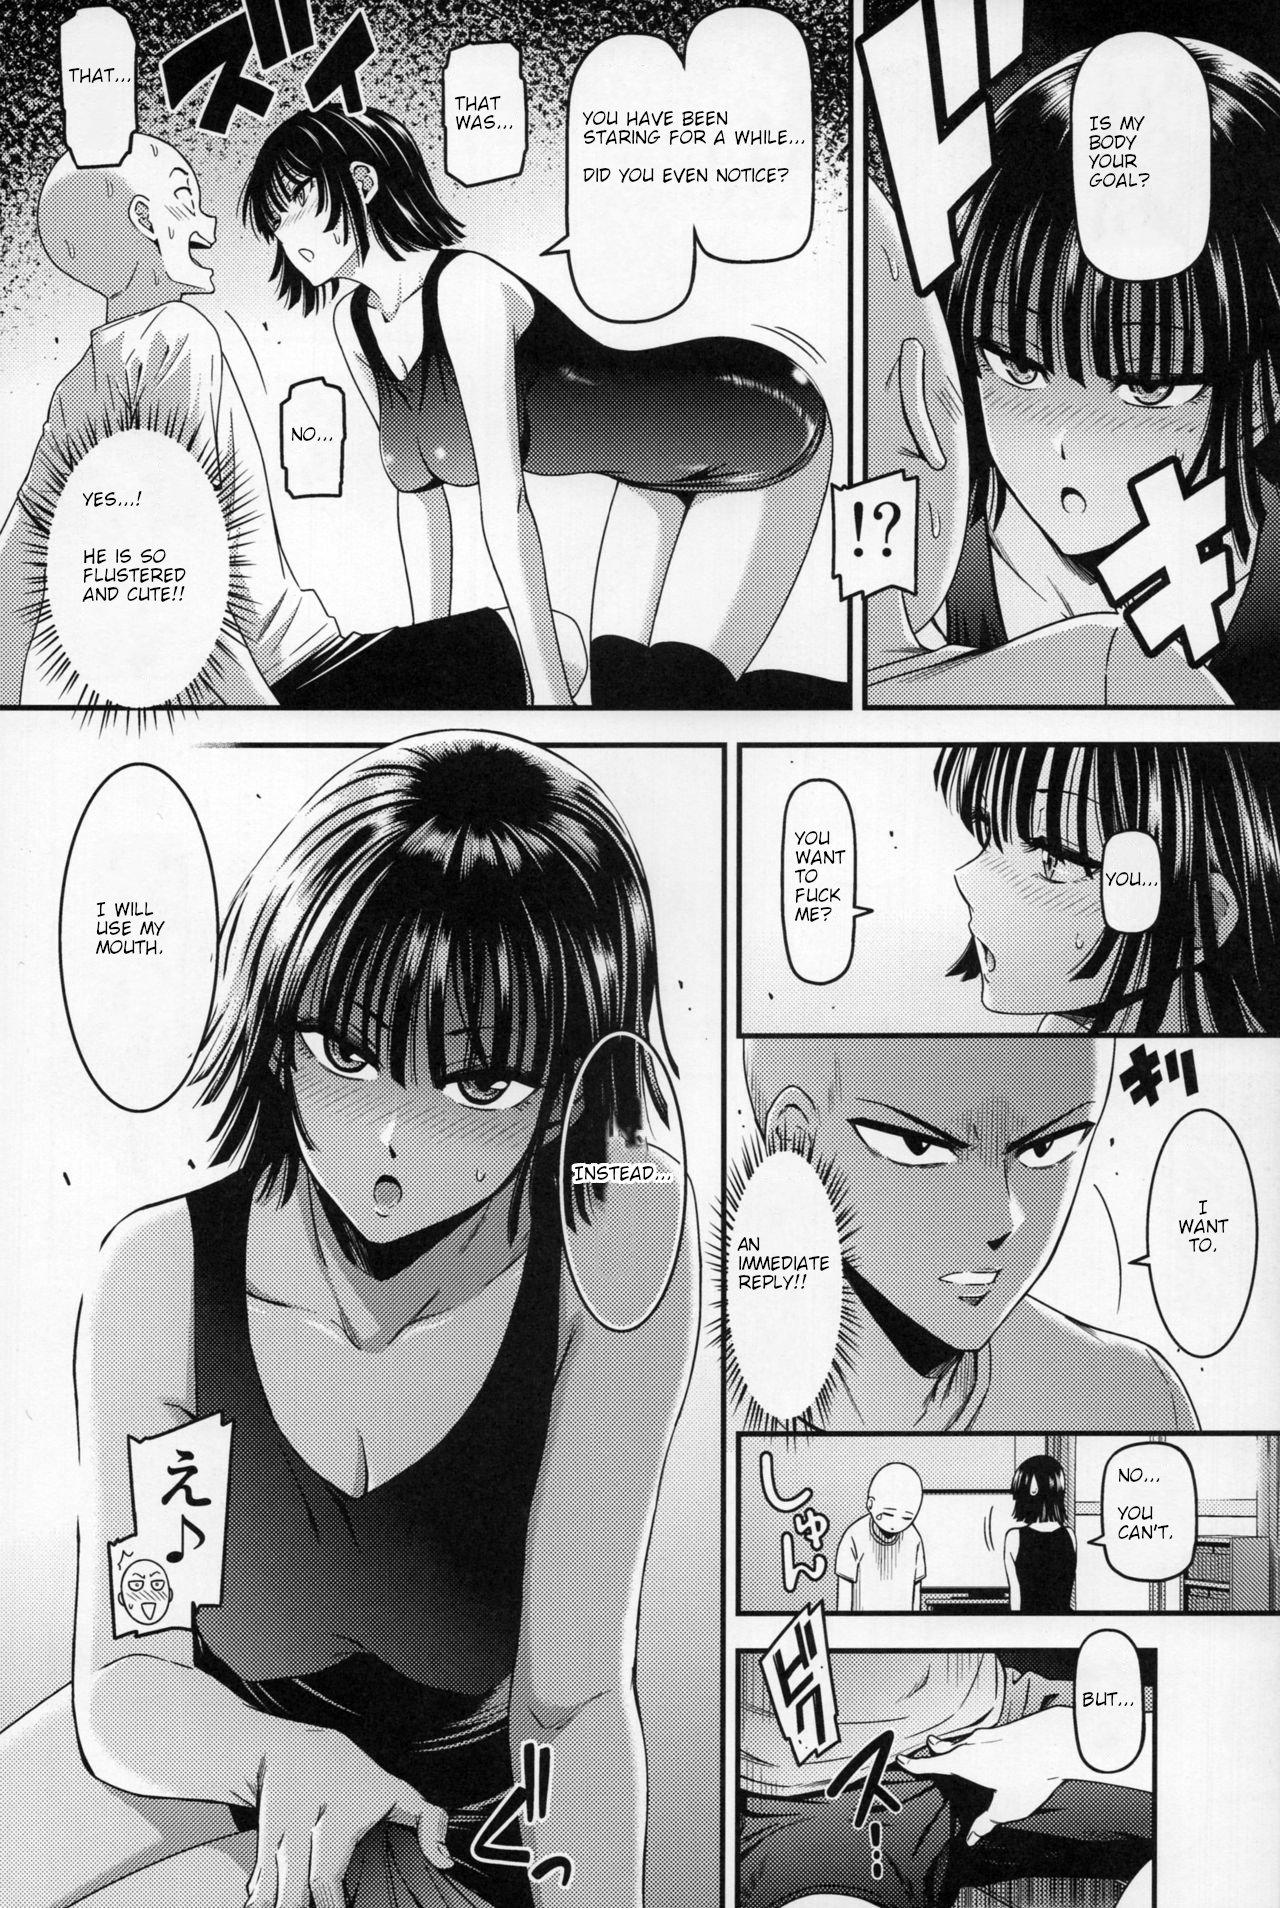 Cumload ONE-HURRICANE 6 - One punch man Oriental - Page 9